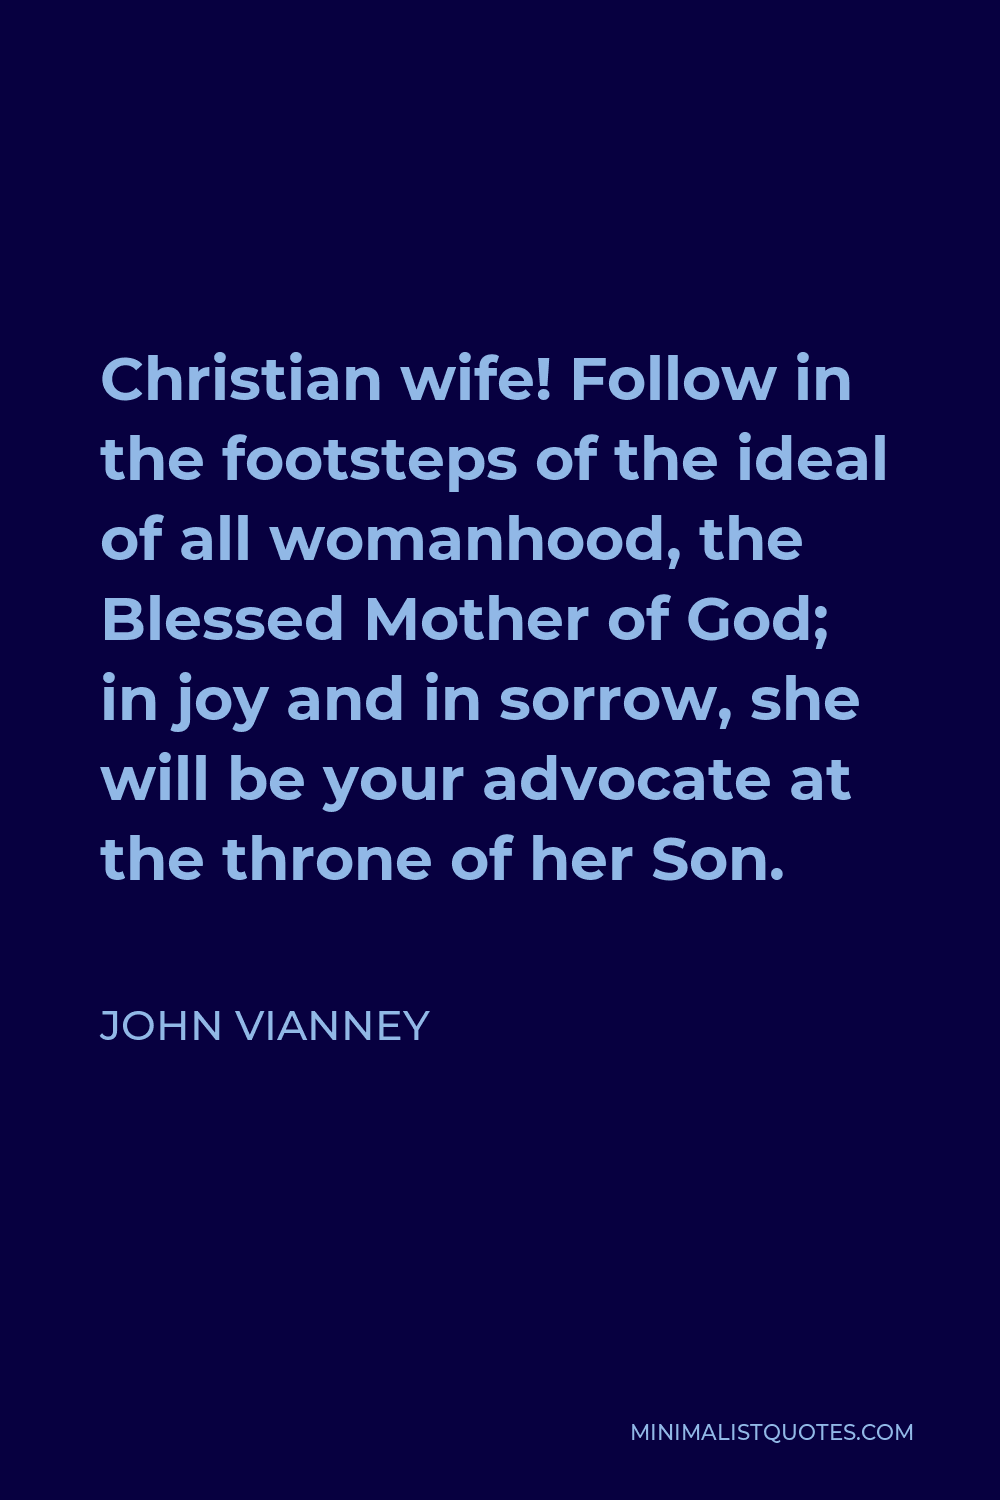 John Vianney Quote - Christian wife! Follow in the footsteps of the ideal of all womanhood, the Blessed Mother of God; in joy and in sorrow, she will be your advocate at the throne of her Son.